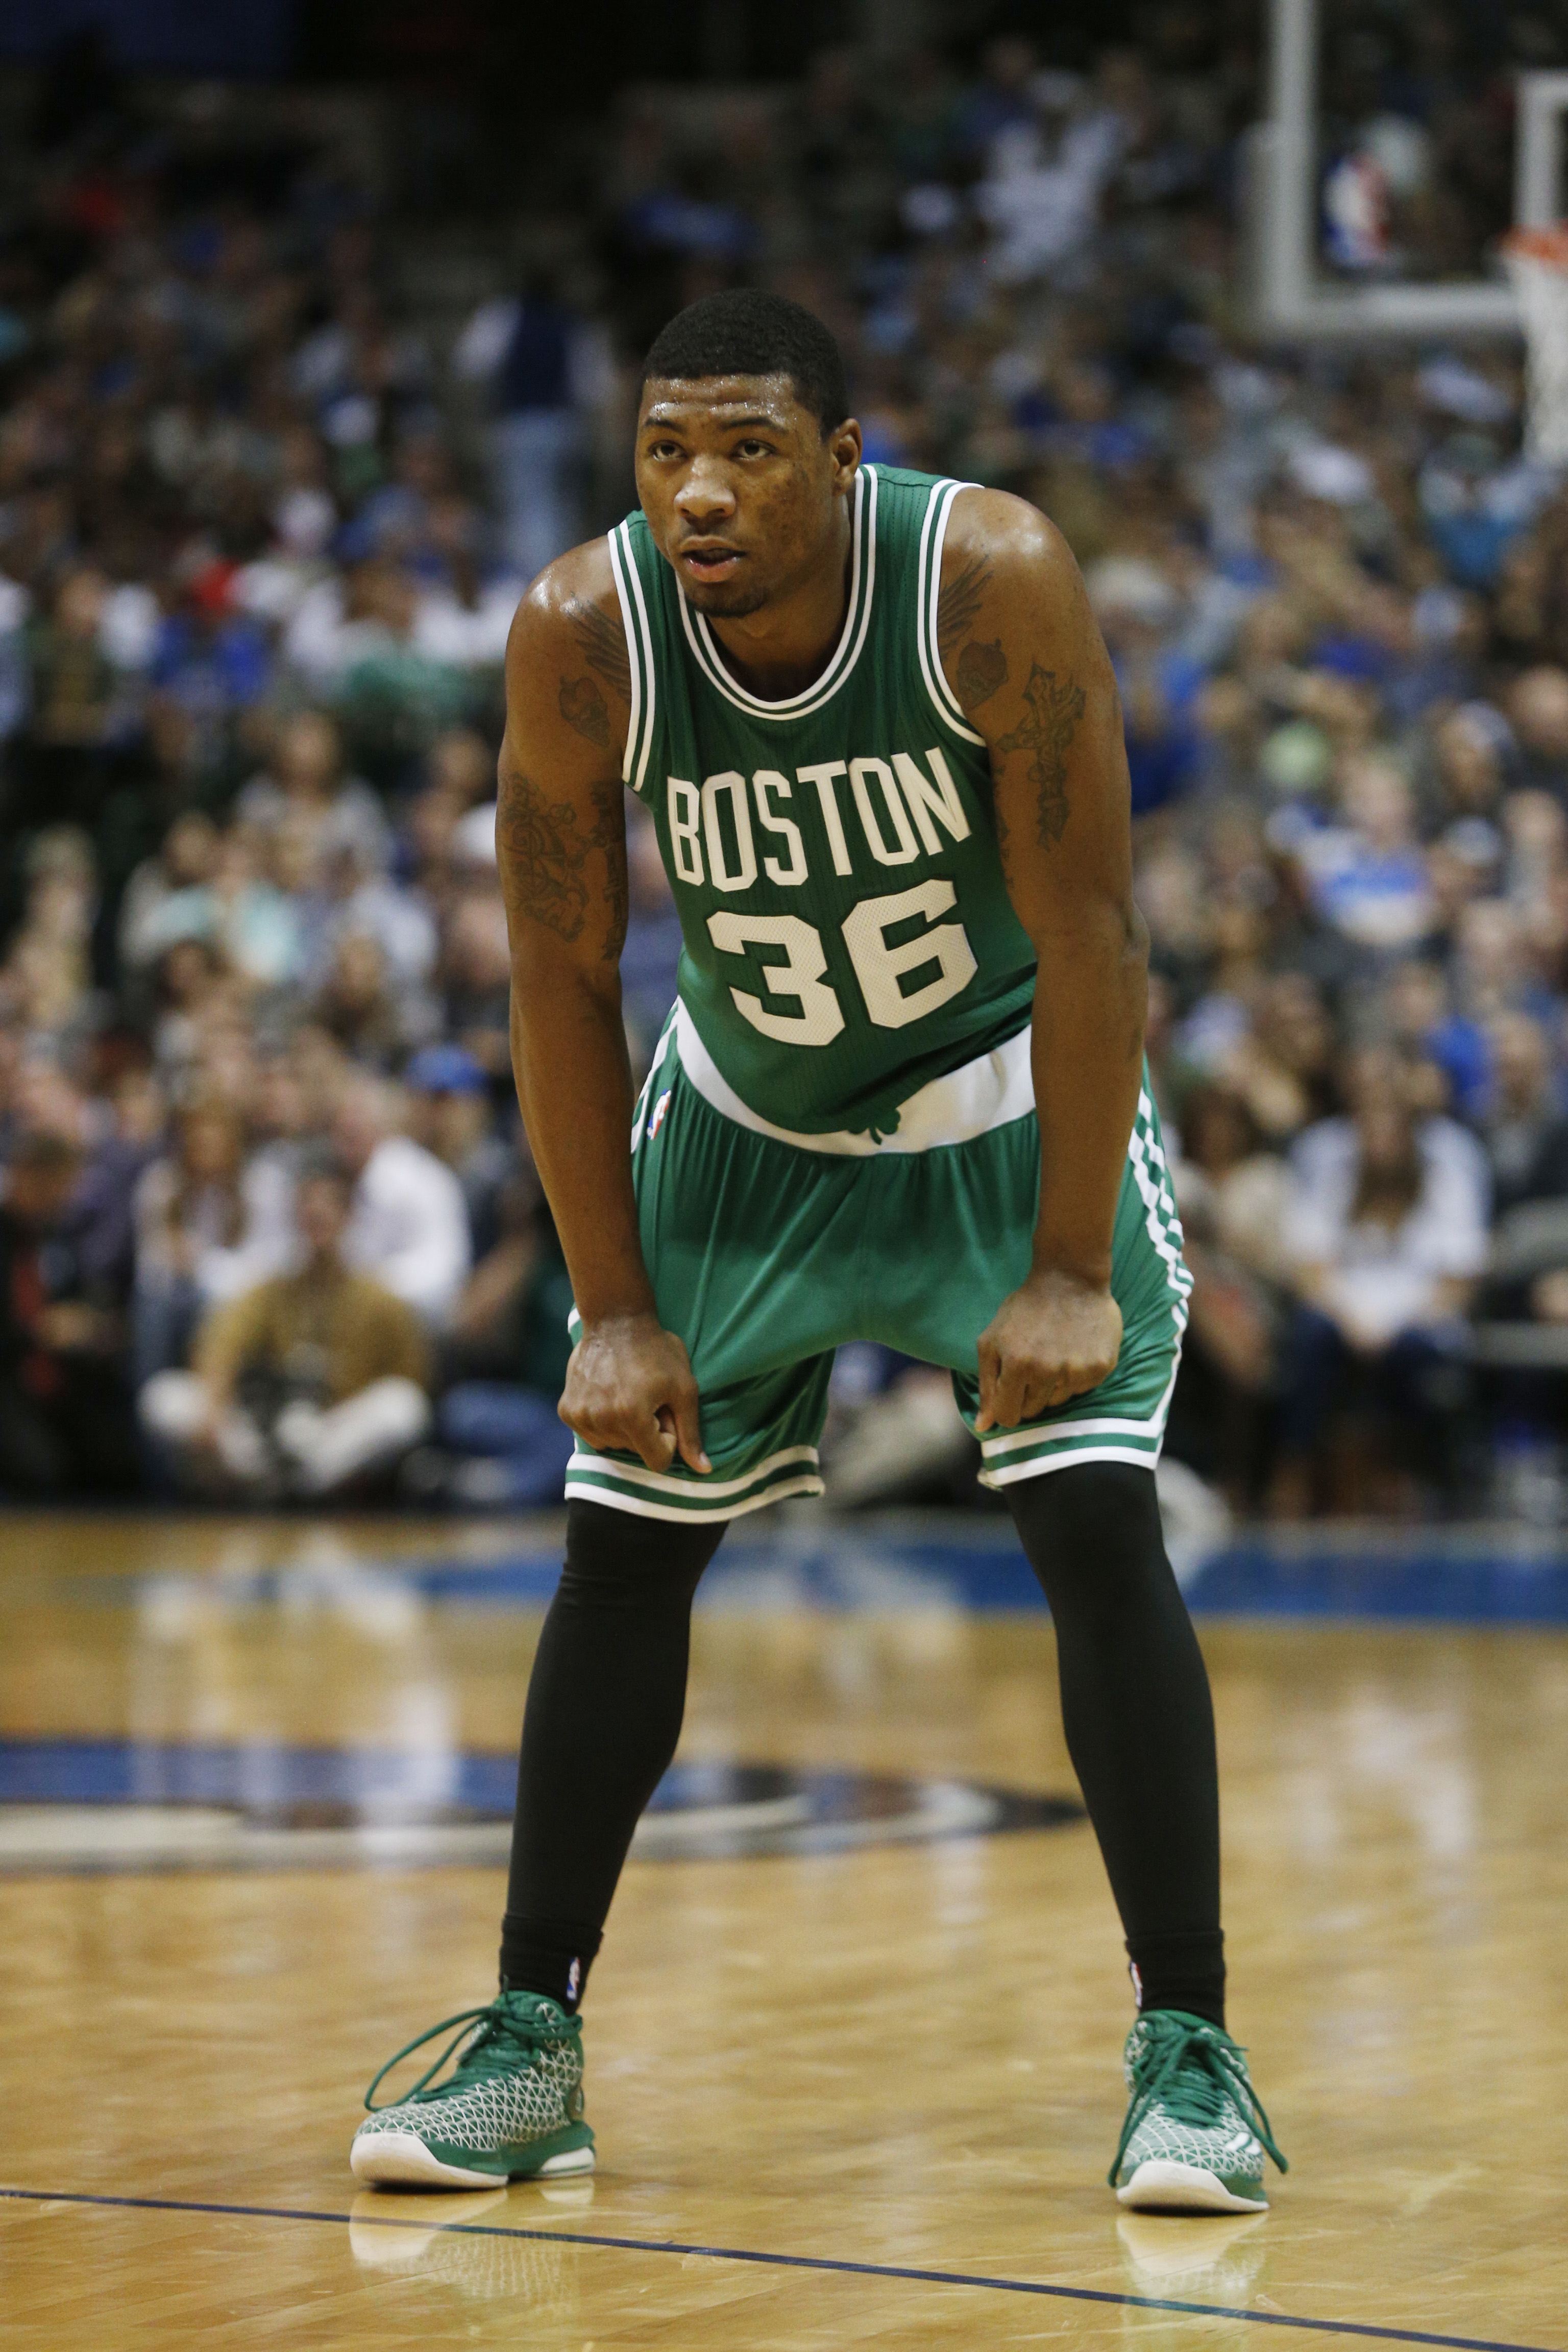 Marcus Smart Could Miss "Several Weeks" With Ankle Injury